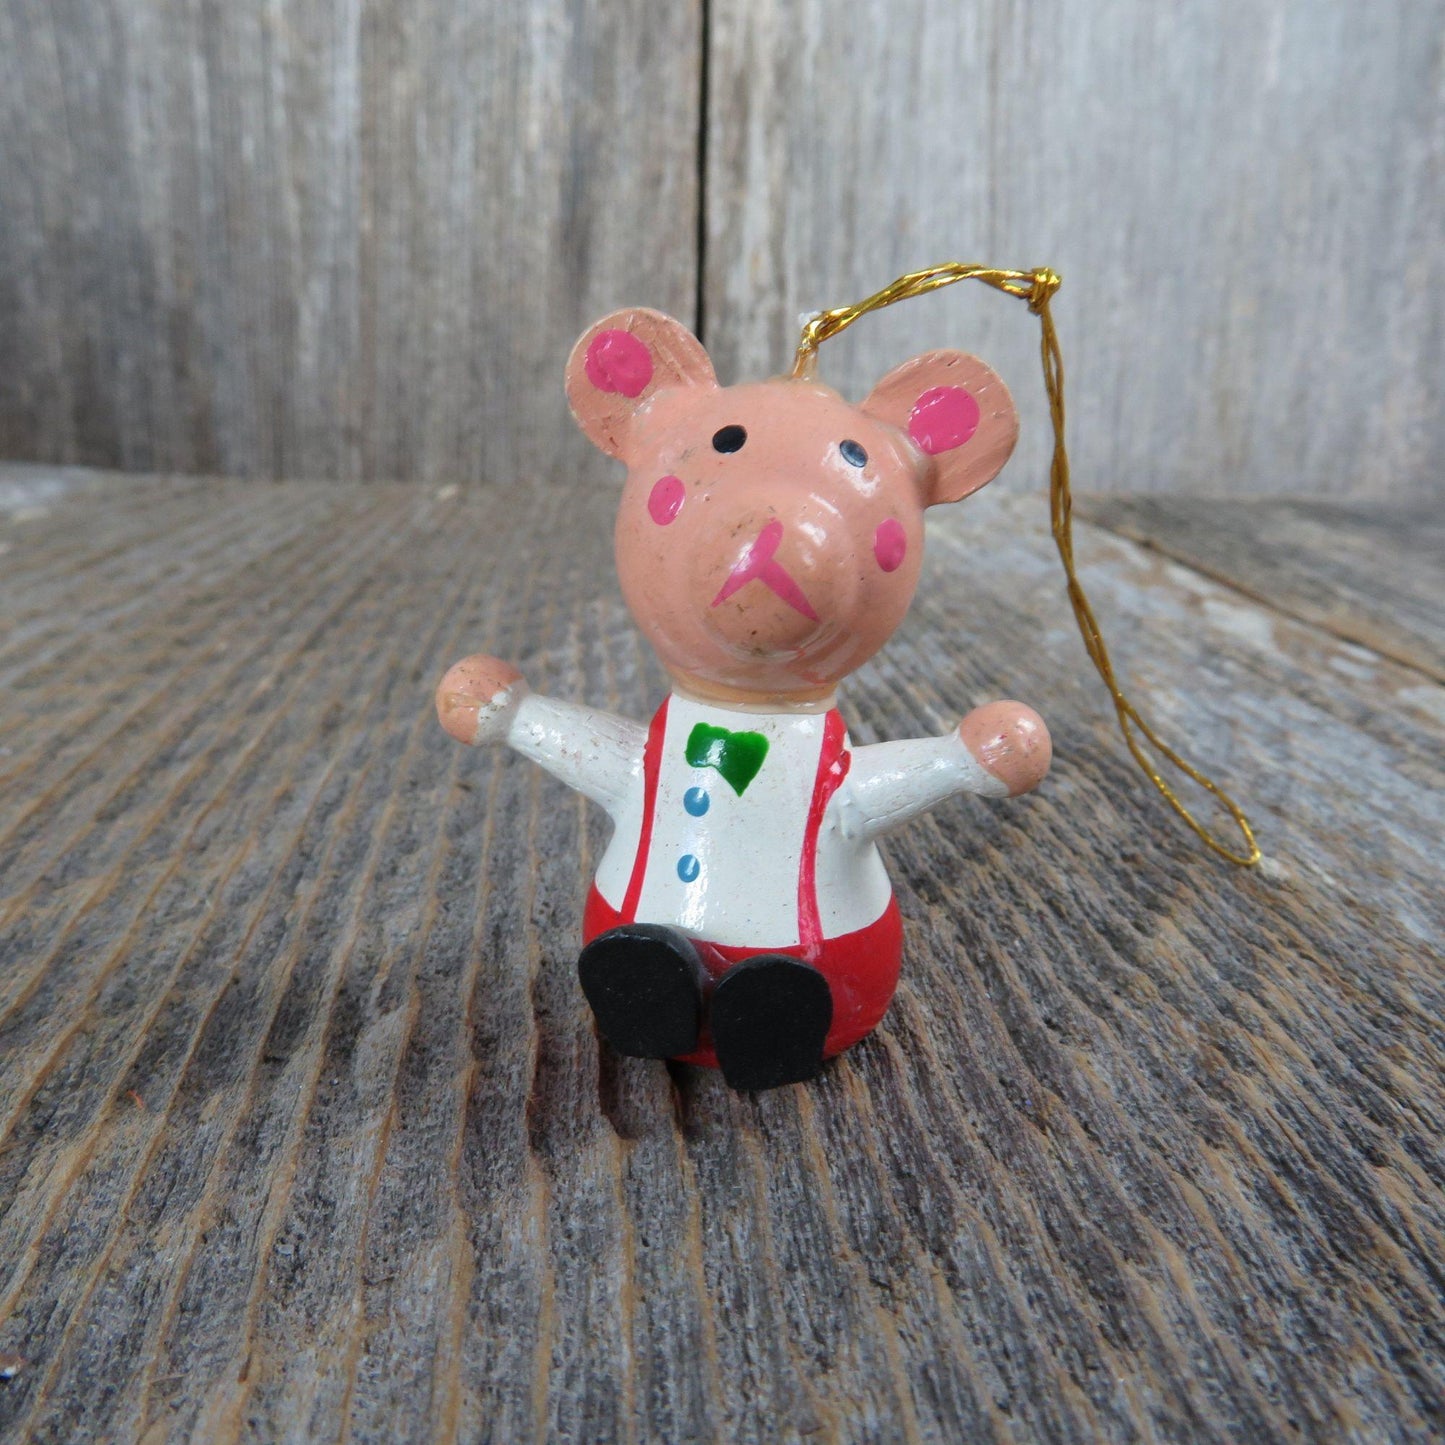 Vintage Teddy Bear Wooden Ornament Suspenders Bow Tie Wood Red Green White Christmas Wood Pig